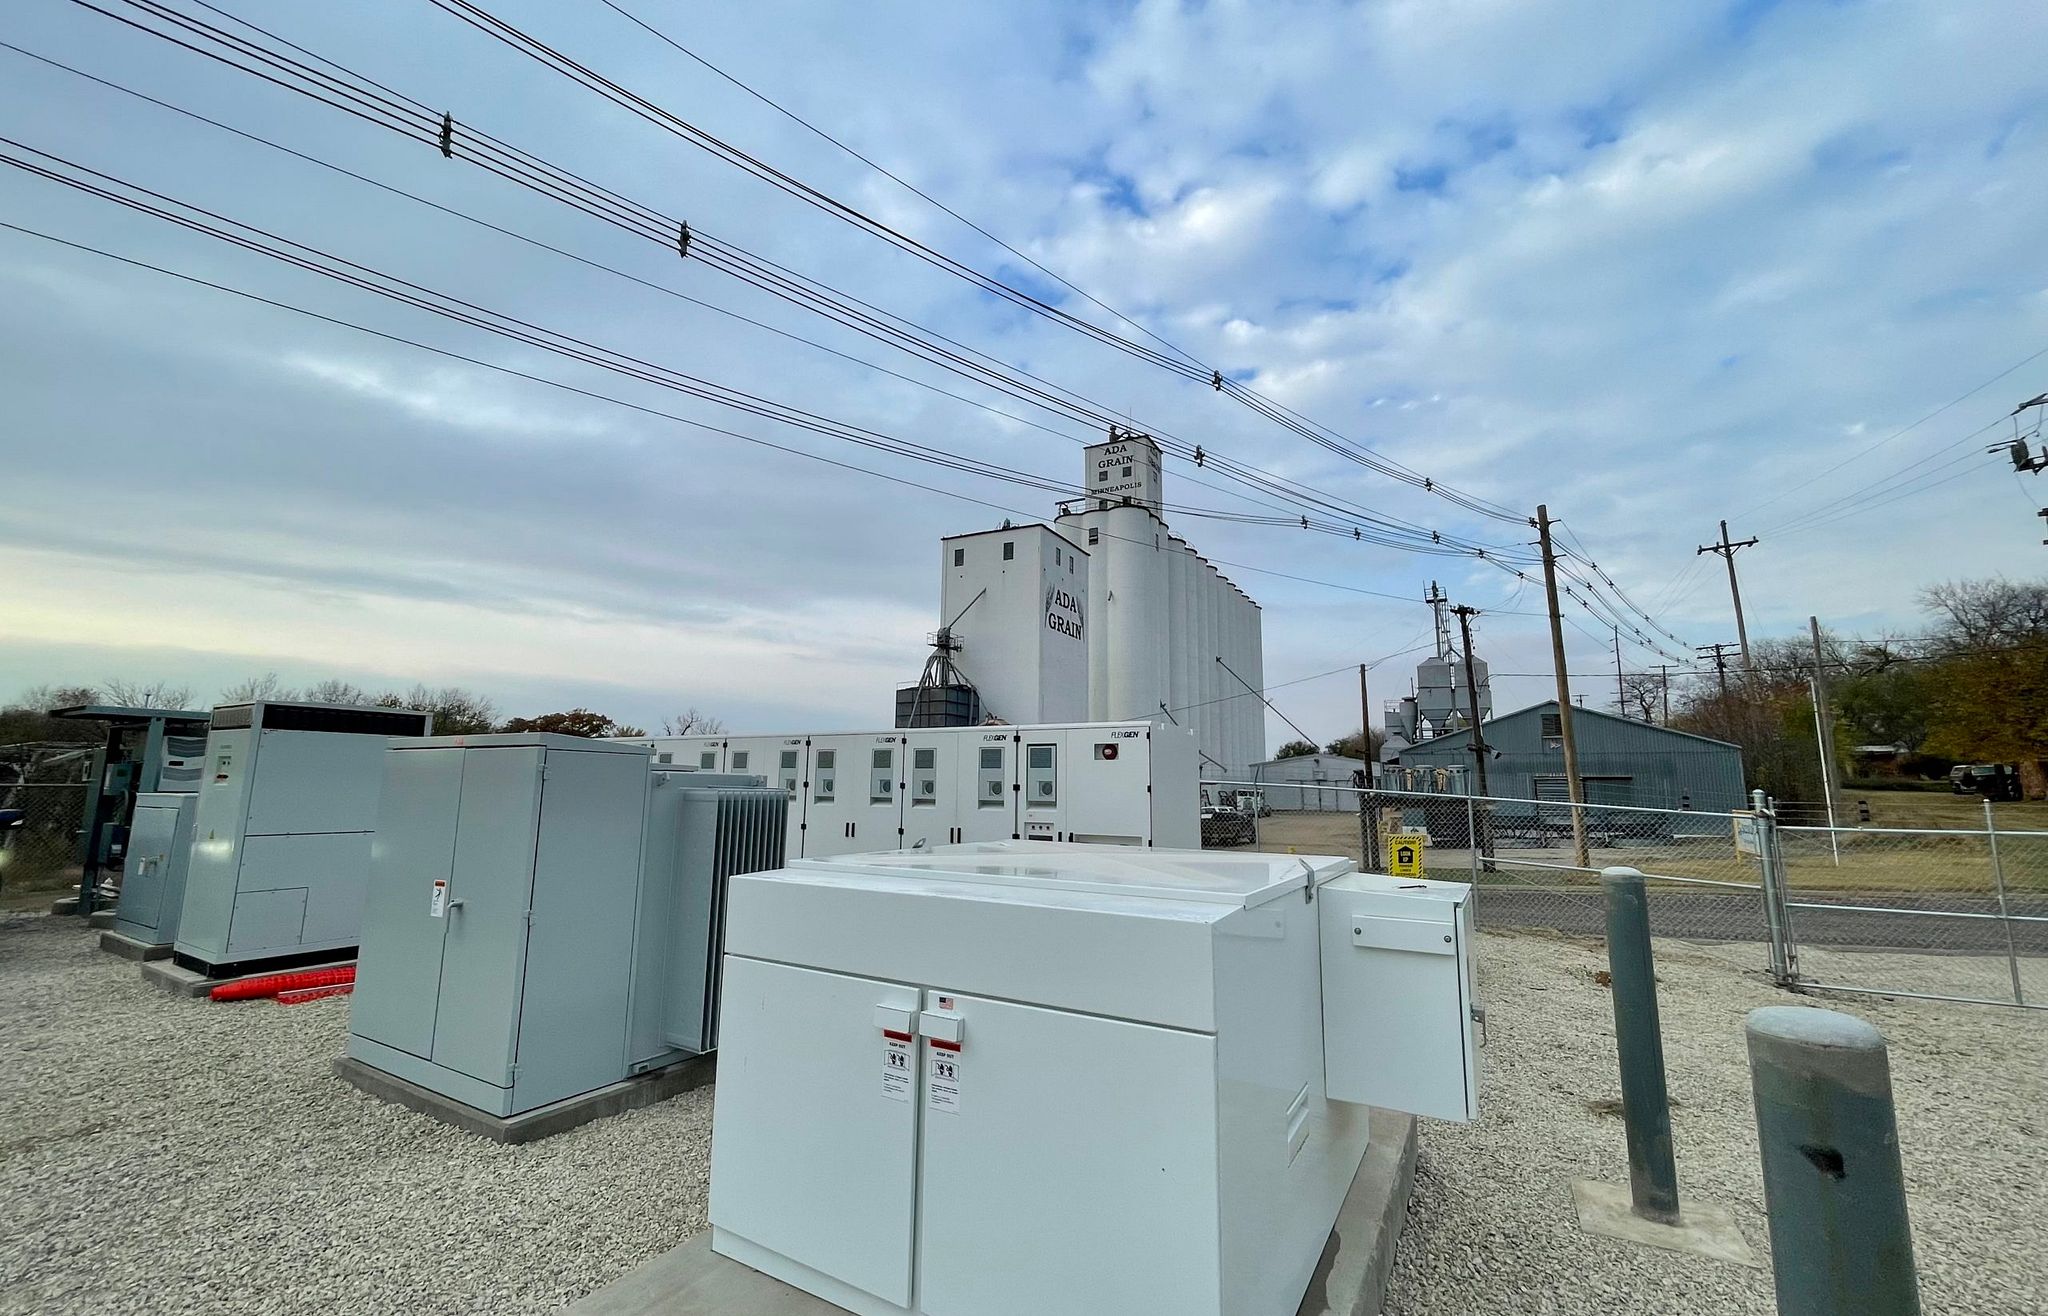 Utility-scale FlexGen batteries at a substation in Minneapolis provide energy storage supporting grid resilience and benefiting consumers.